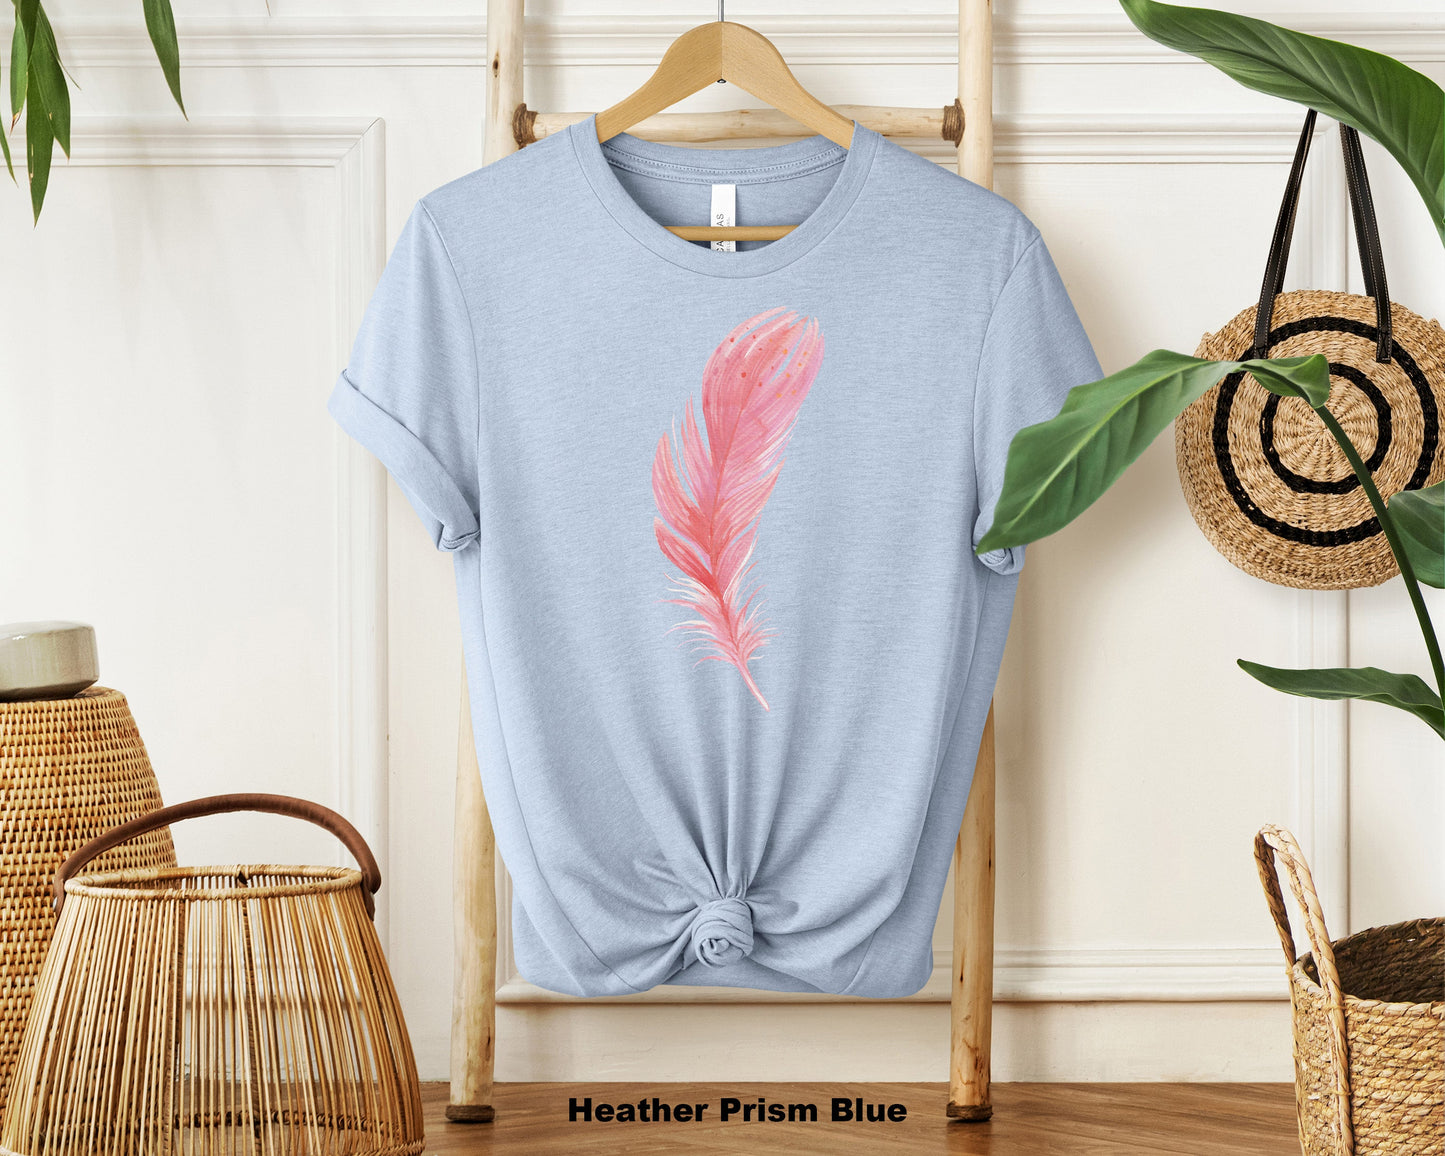 "Soft Cotton Watercolor Feather Design Pink T-Shirt for Trendy Women"